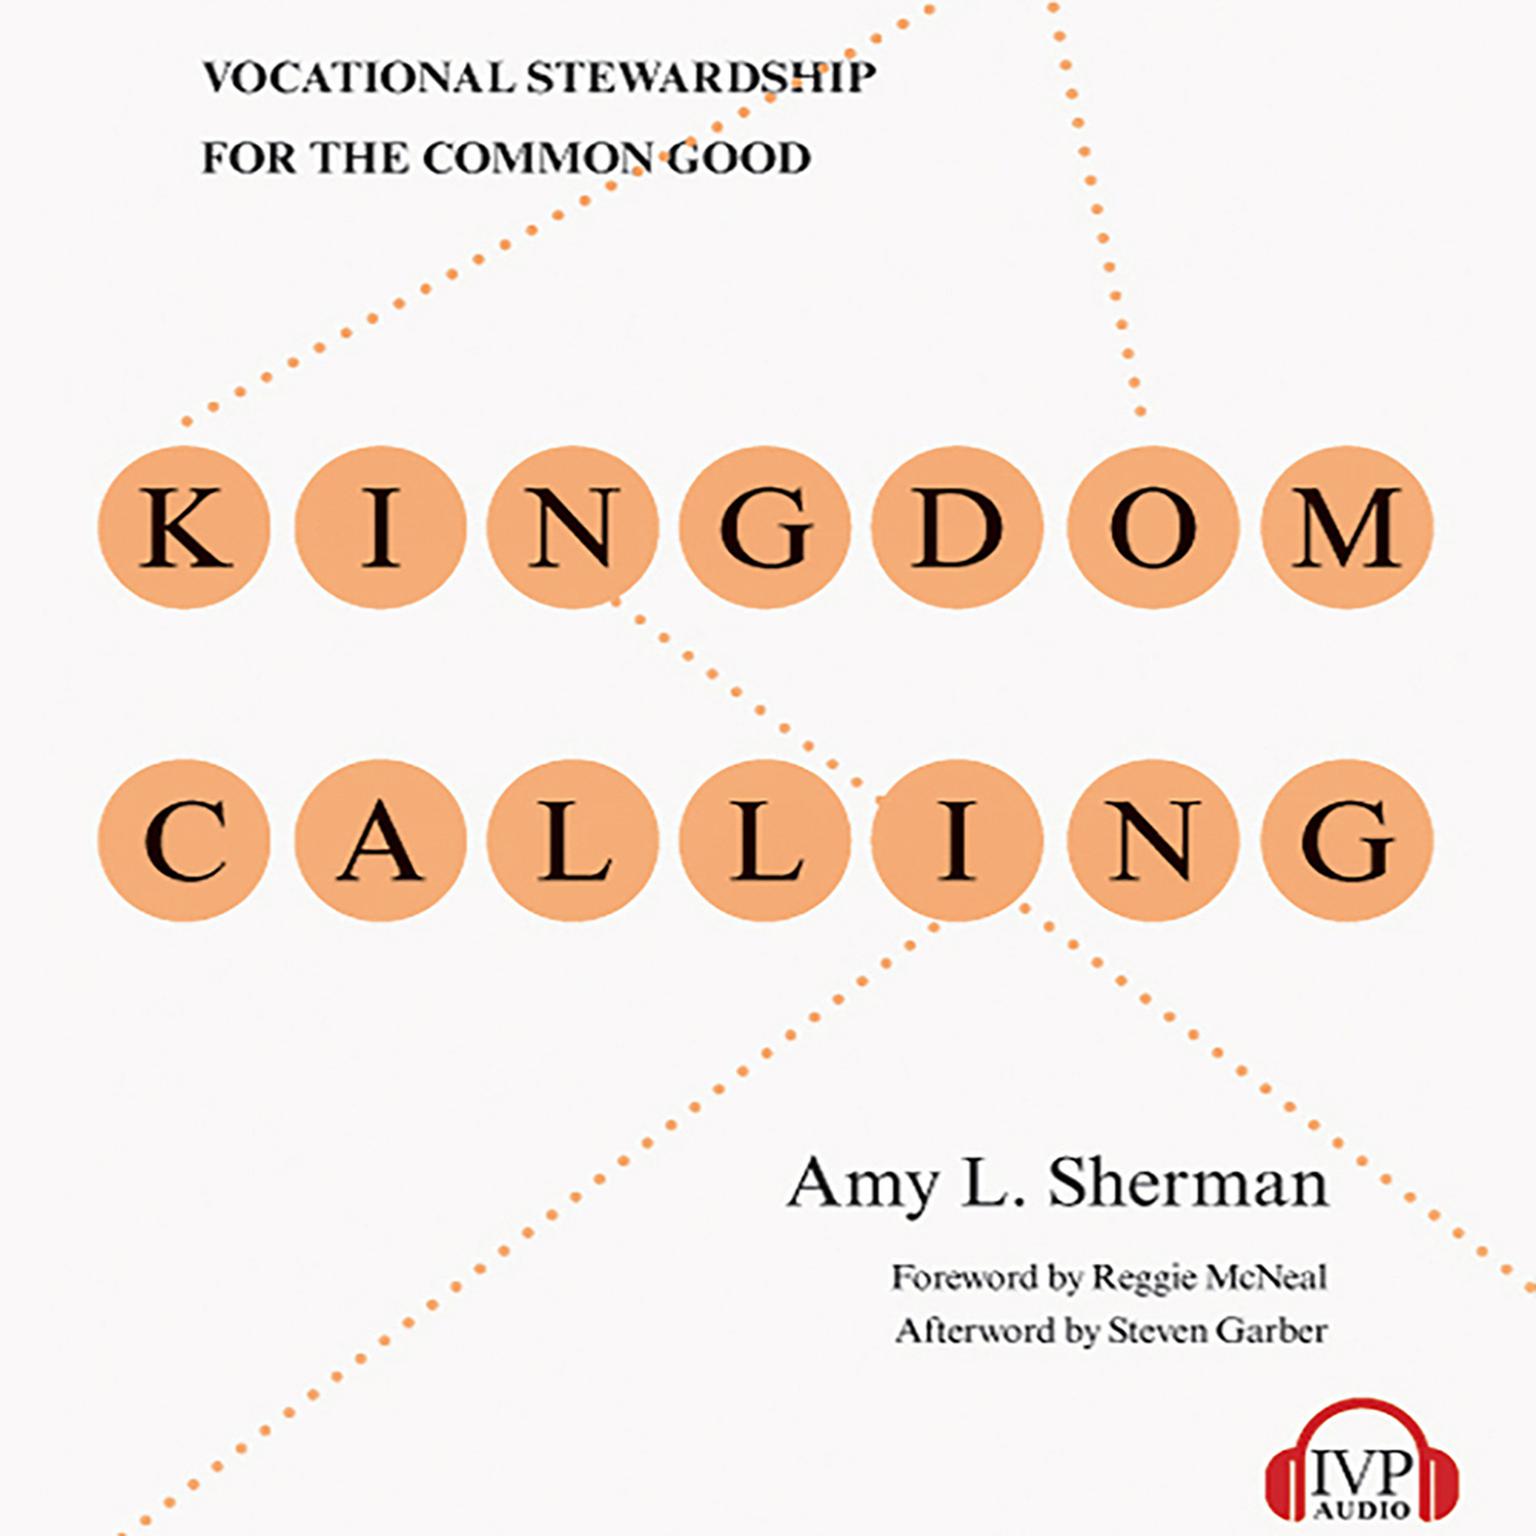 Kingdom Calling: Vocational Stewardship for the Common Good Audiobook, by Amy L. Sherman